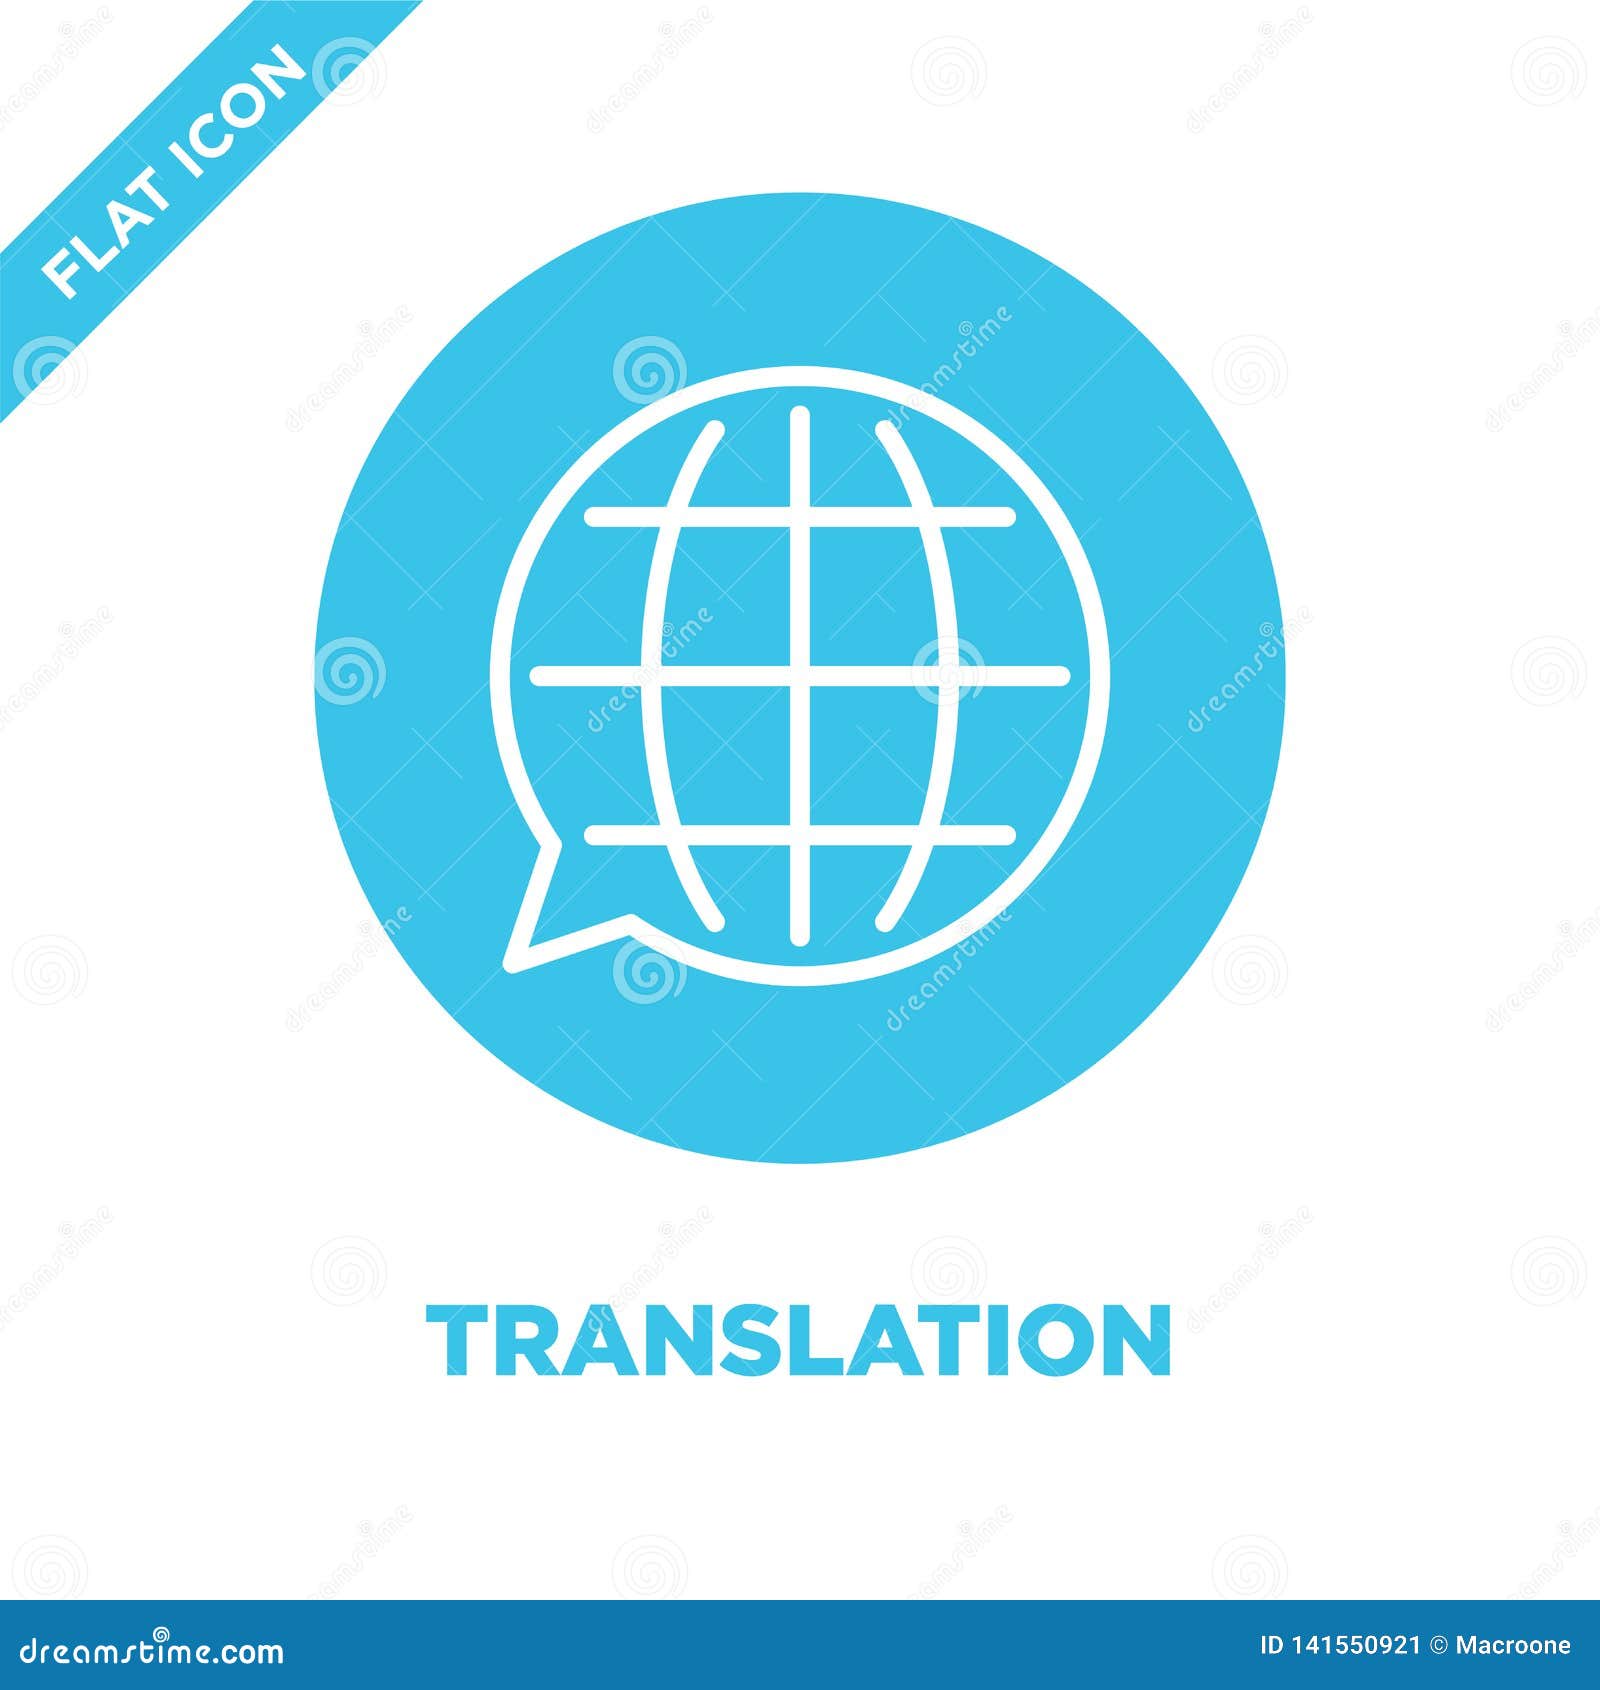 translation icon . thin line translation outline icon  .translation  for use on web and mobile apps